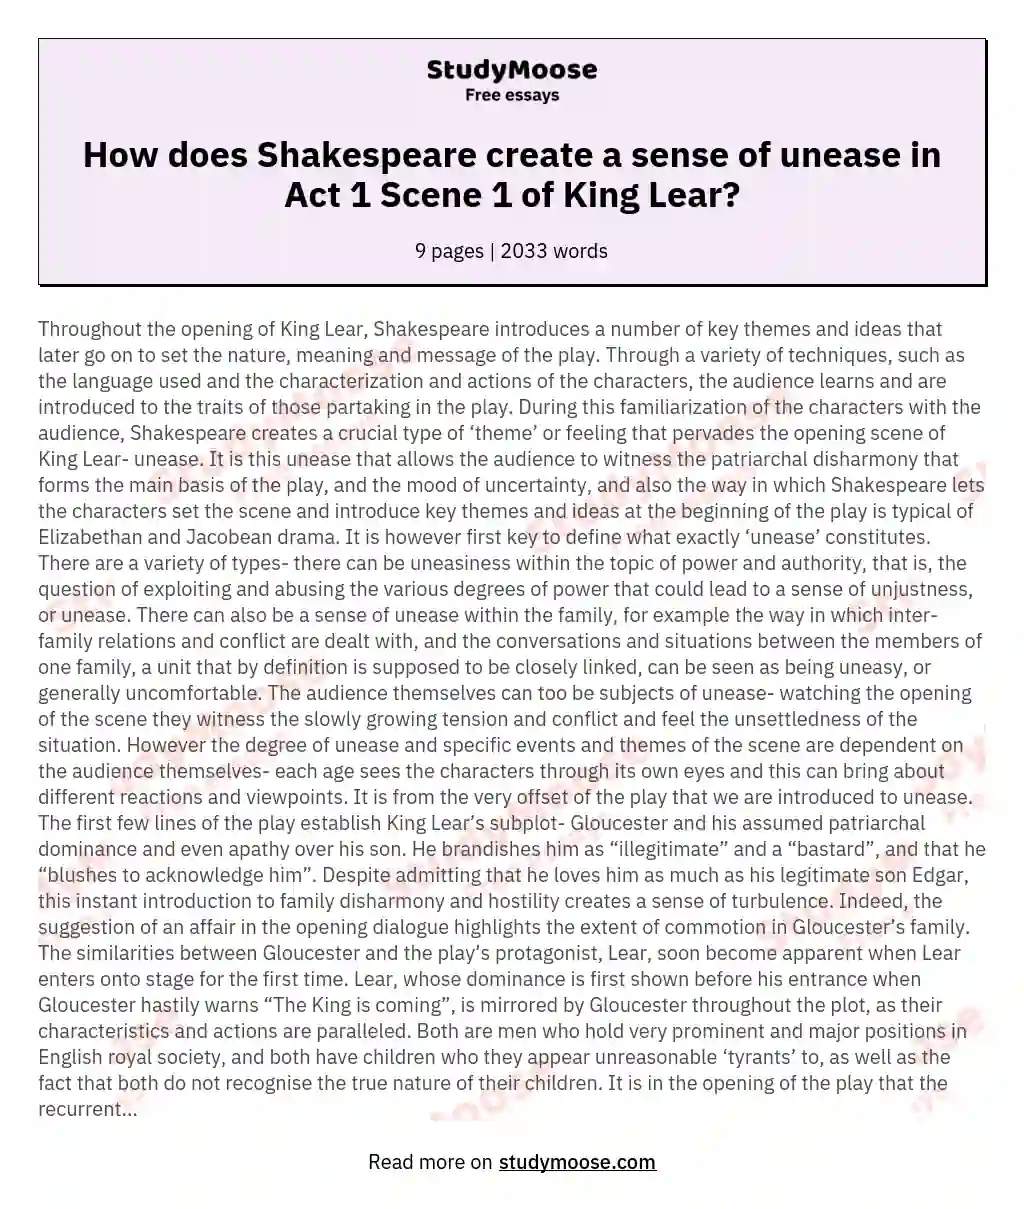 How does Shakespeare create a sense of unease in Act 1 Scene 1 of King Lear?